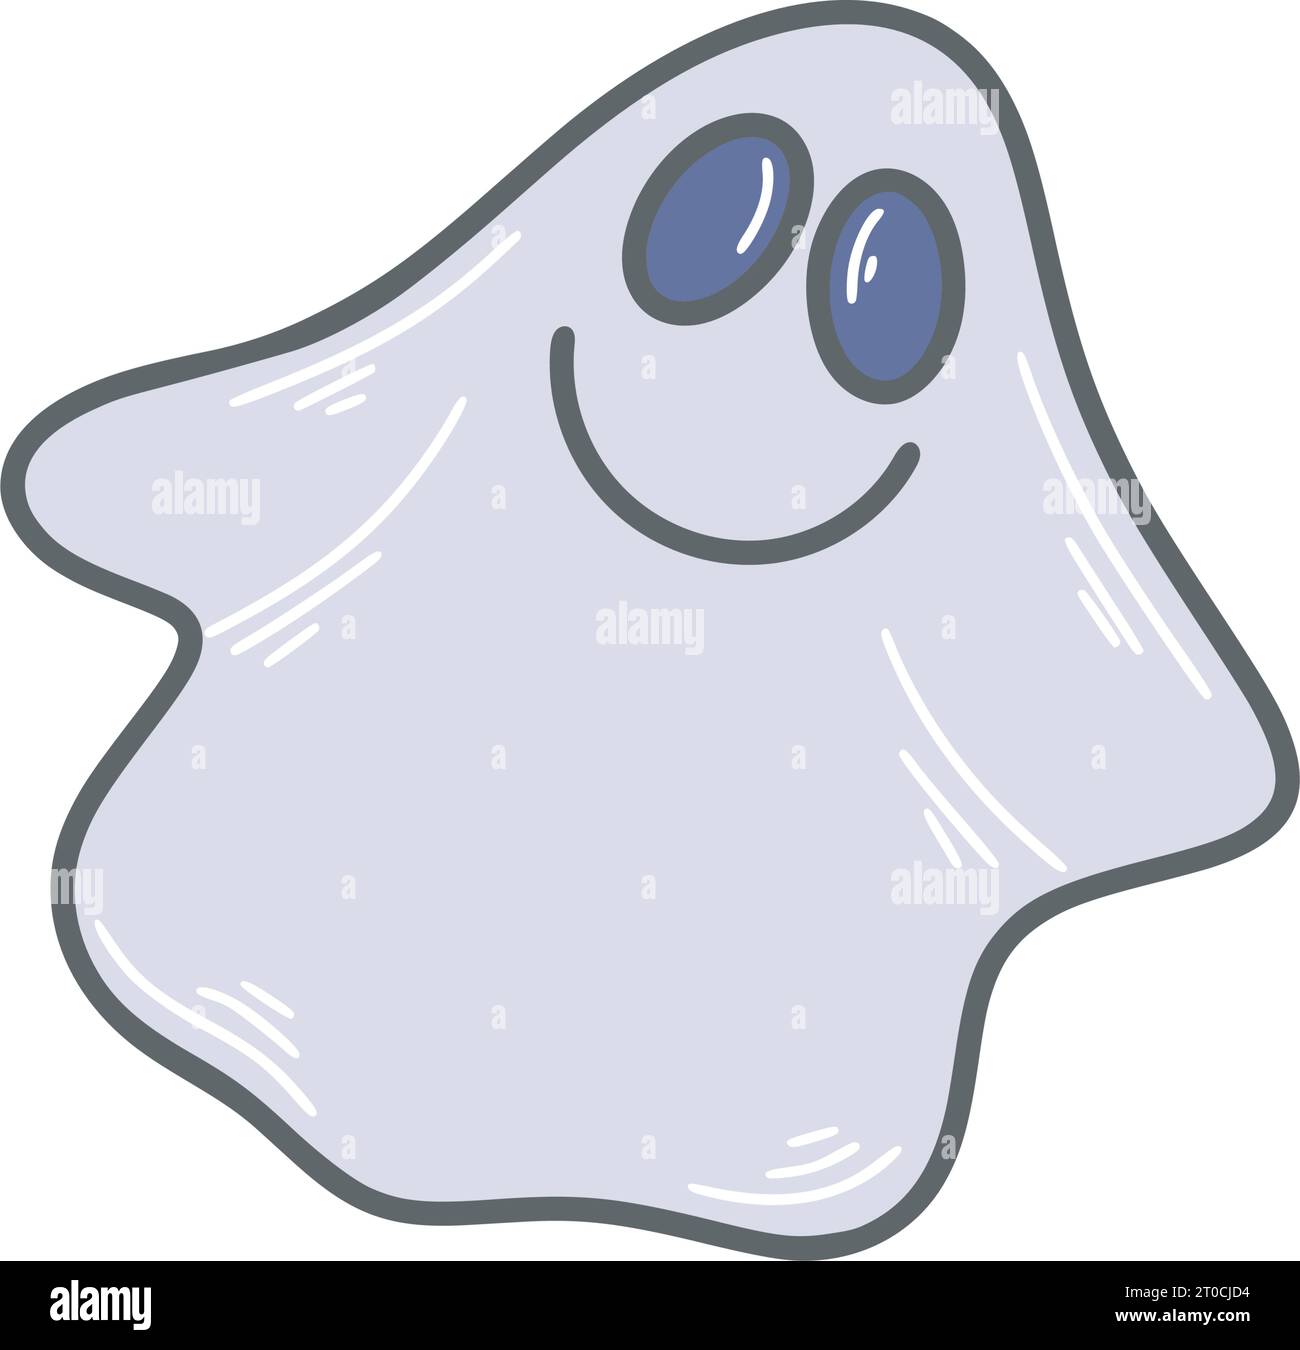 https://c8.alamy.com/comp/2T0CJD4/cute-ghost-smiling-simple-doodle-hand-drawn-halloween-character-clip-art-funny-ghost-isolated-vector-illustration-2T0CJD4.jpg